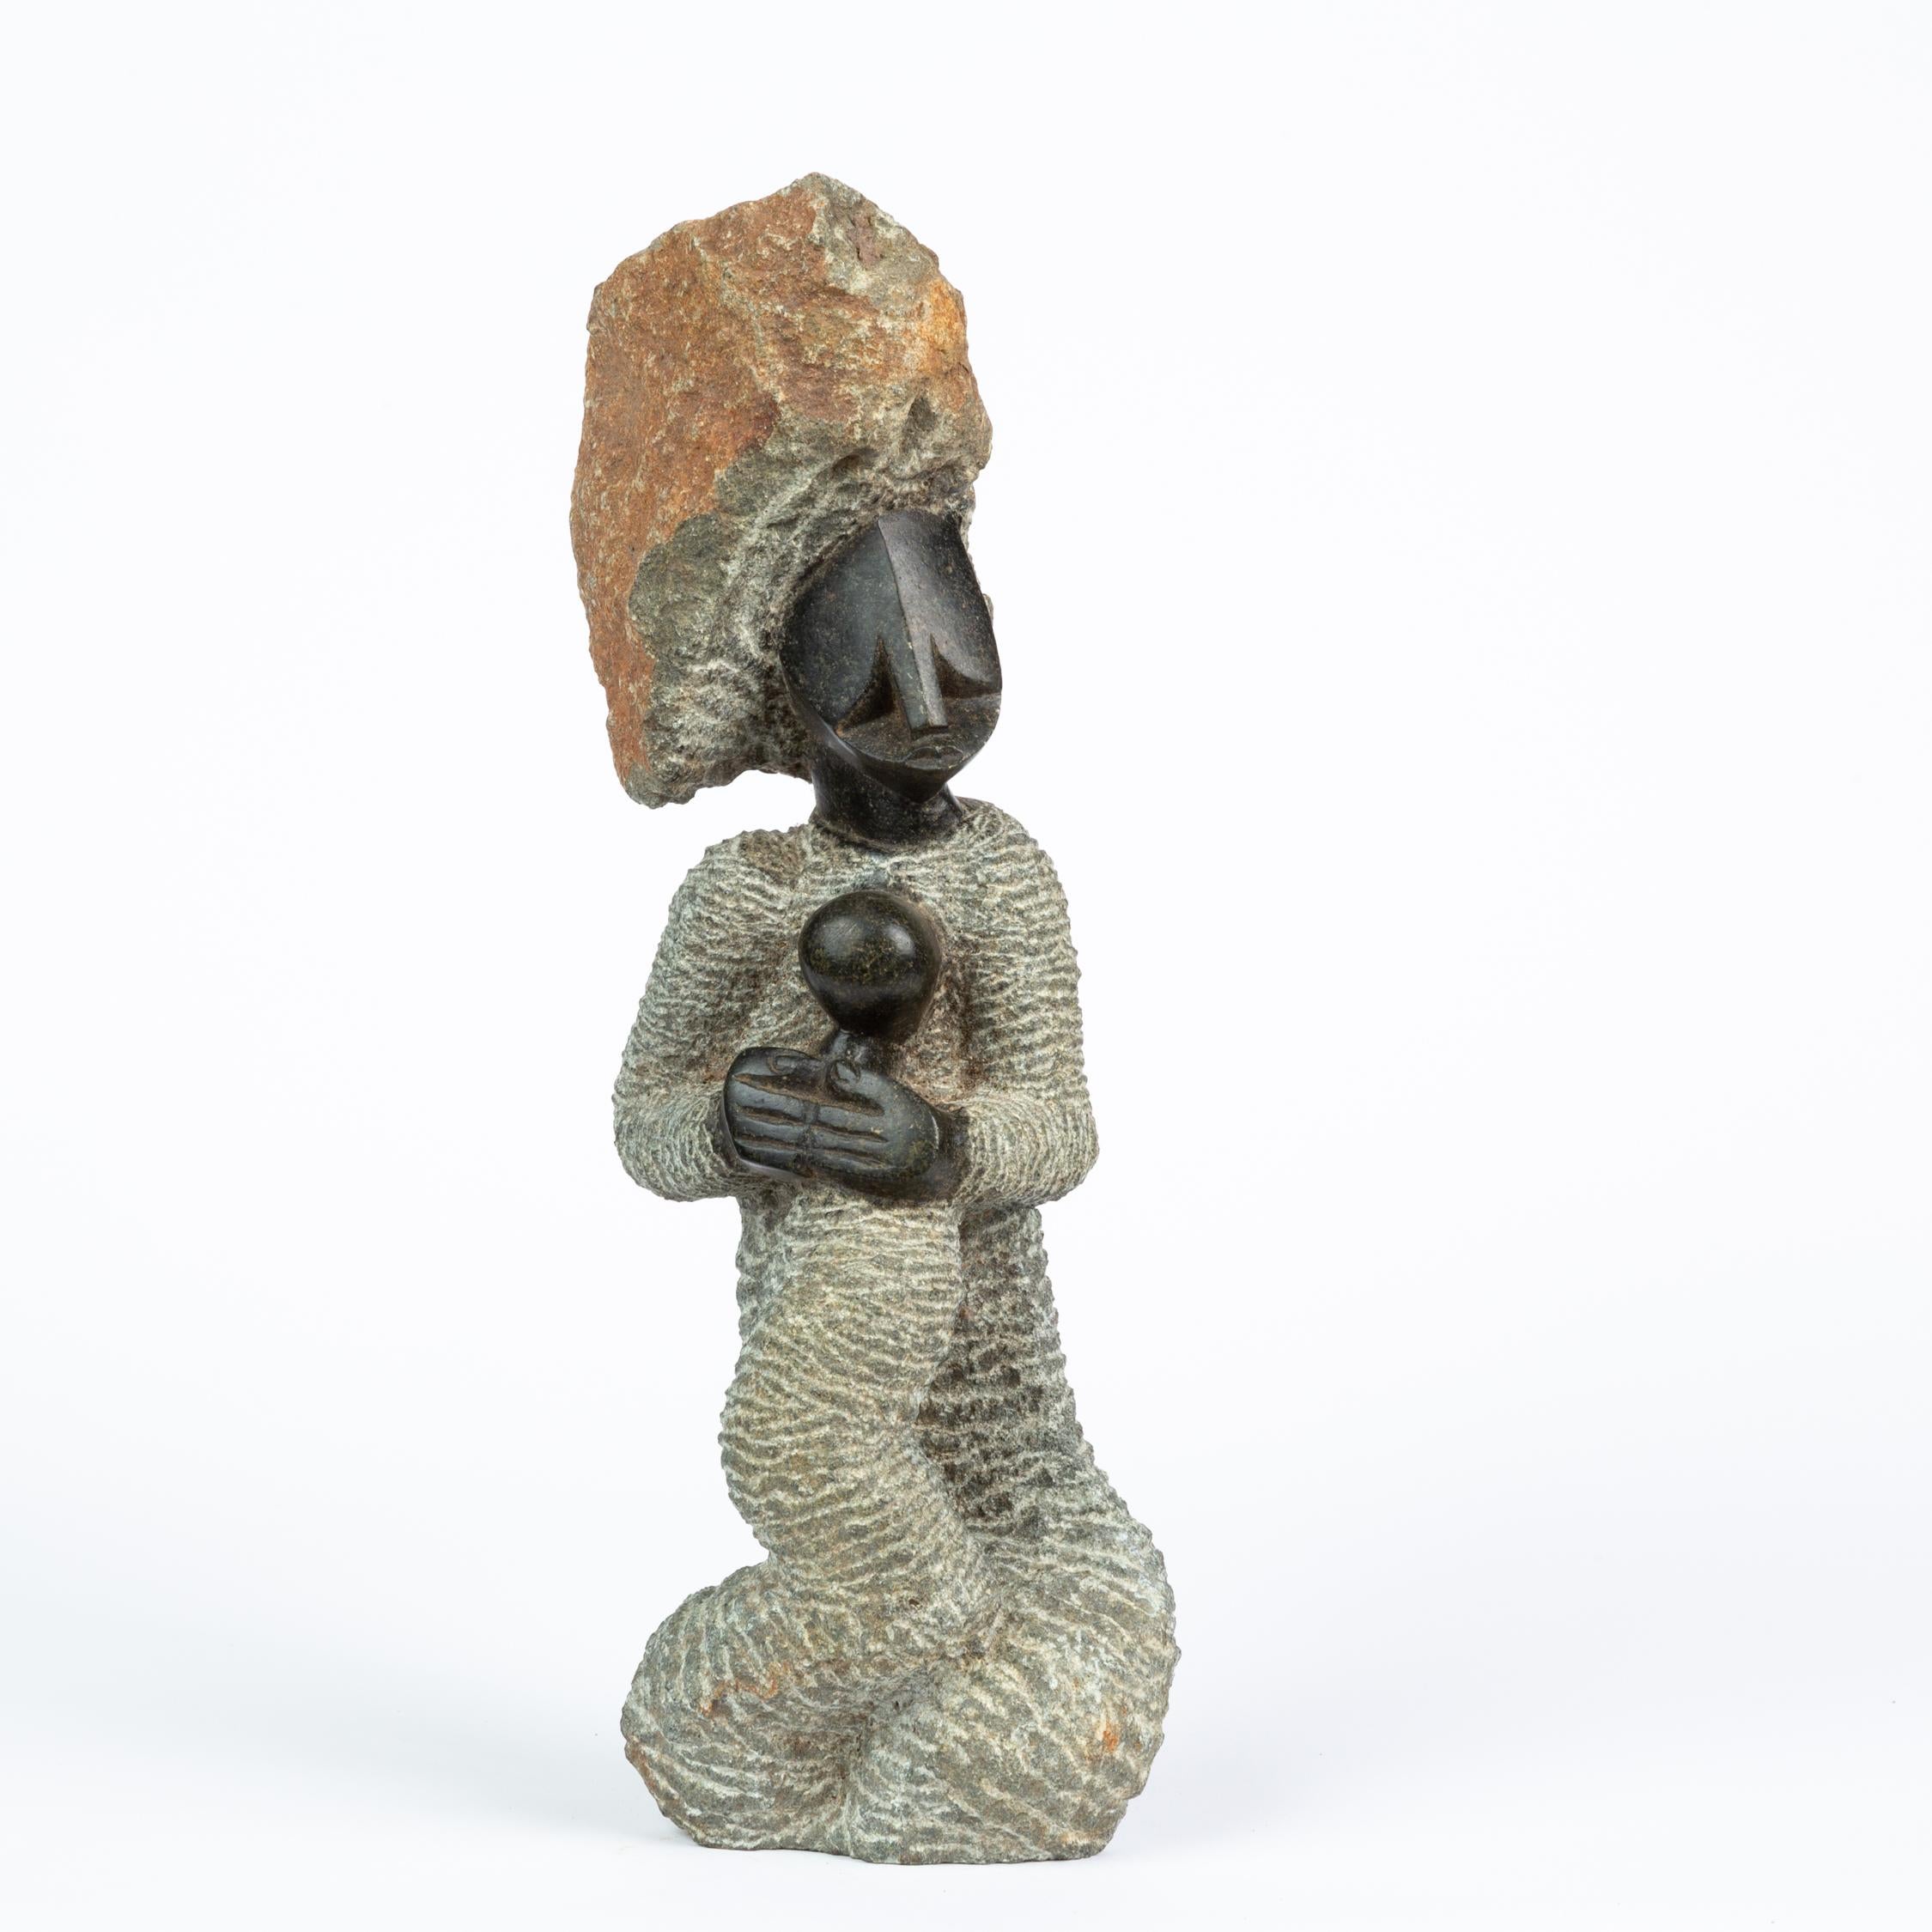 A hand carved statuette of a mother and child in the Shona style of Zimbabwe. The sculpture, carved from black springstone, uses areas of high polish to show the heads and hands of the figures, and works with the natural texture of the stone to